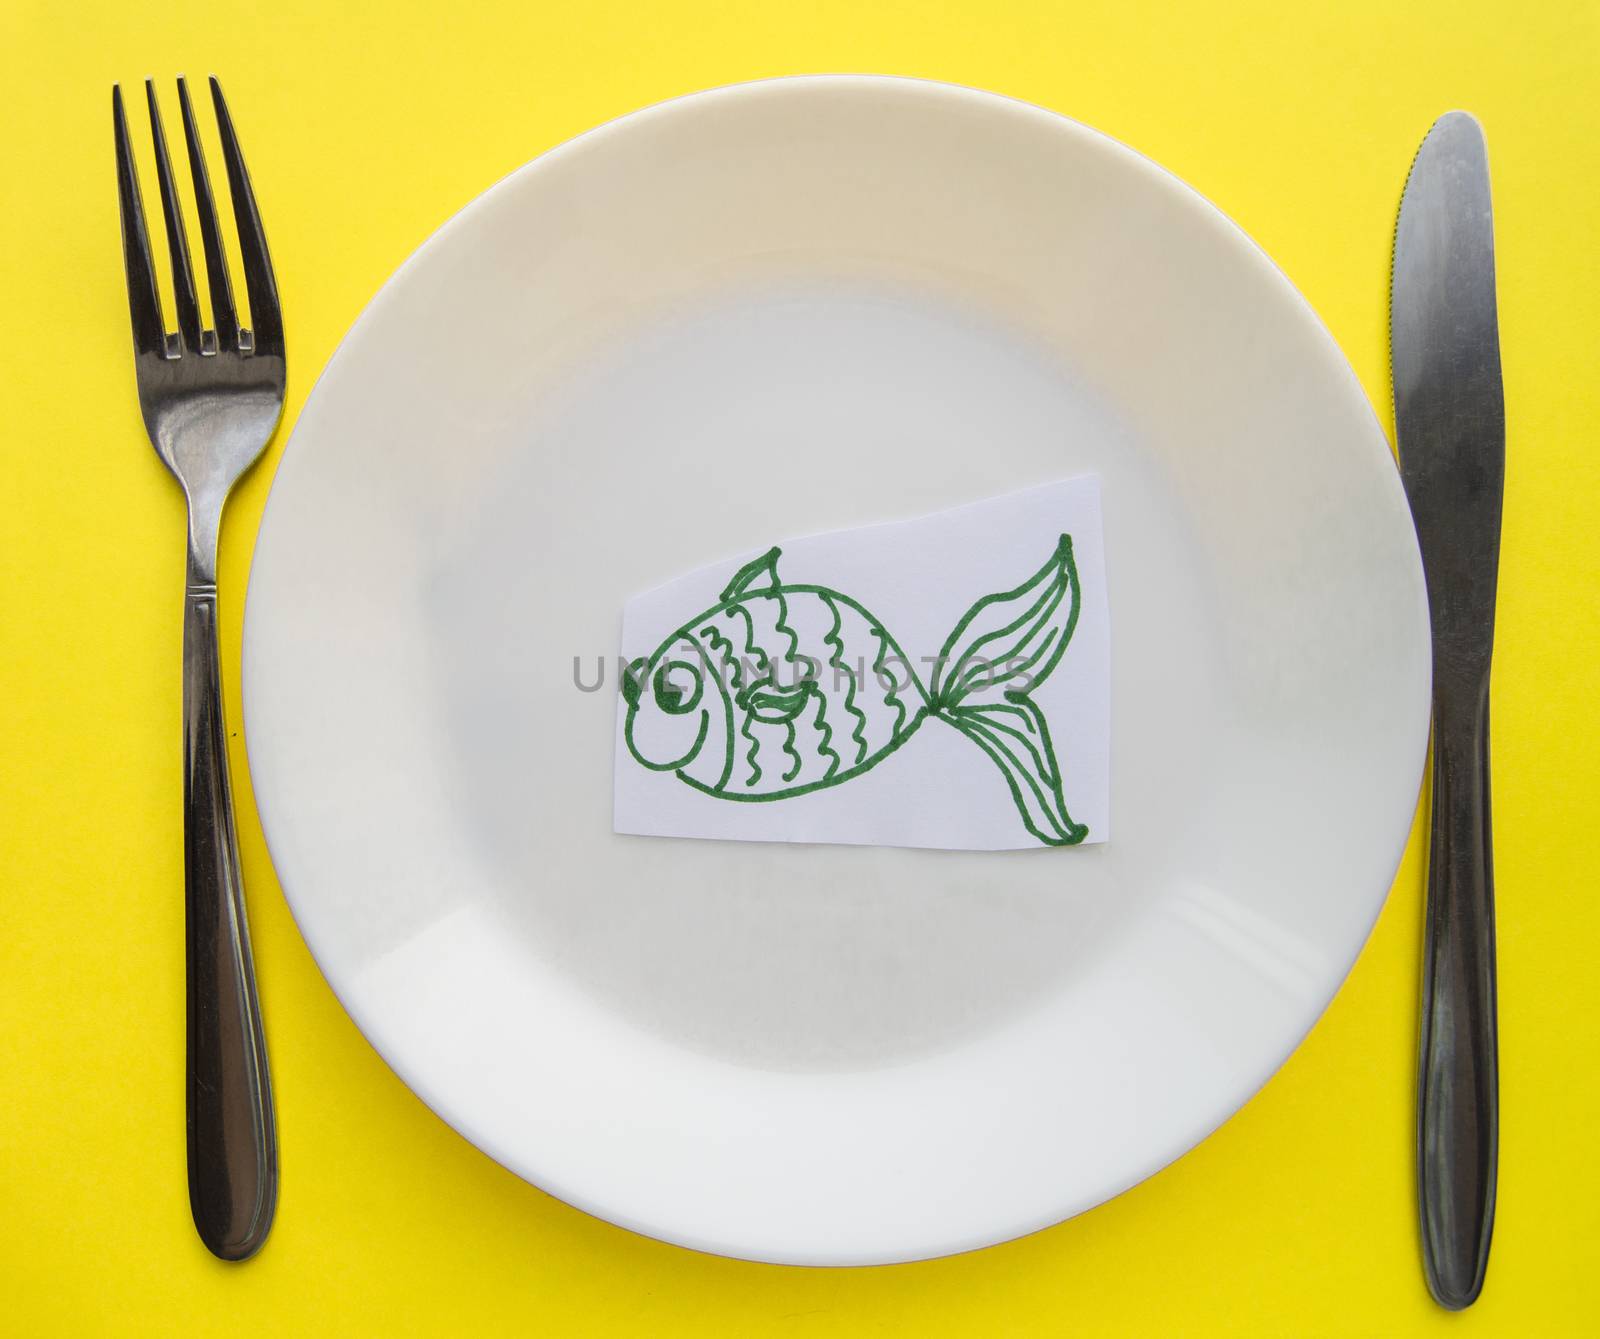 The celebration of April fool's Day, a Plate with a fork and knife and a paper fish on a yellow colored background. Humor.